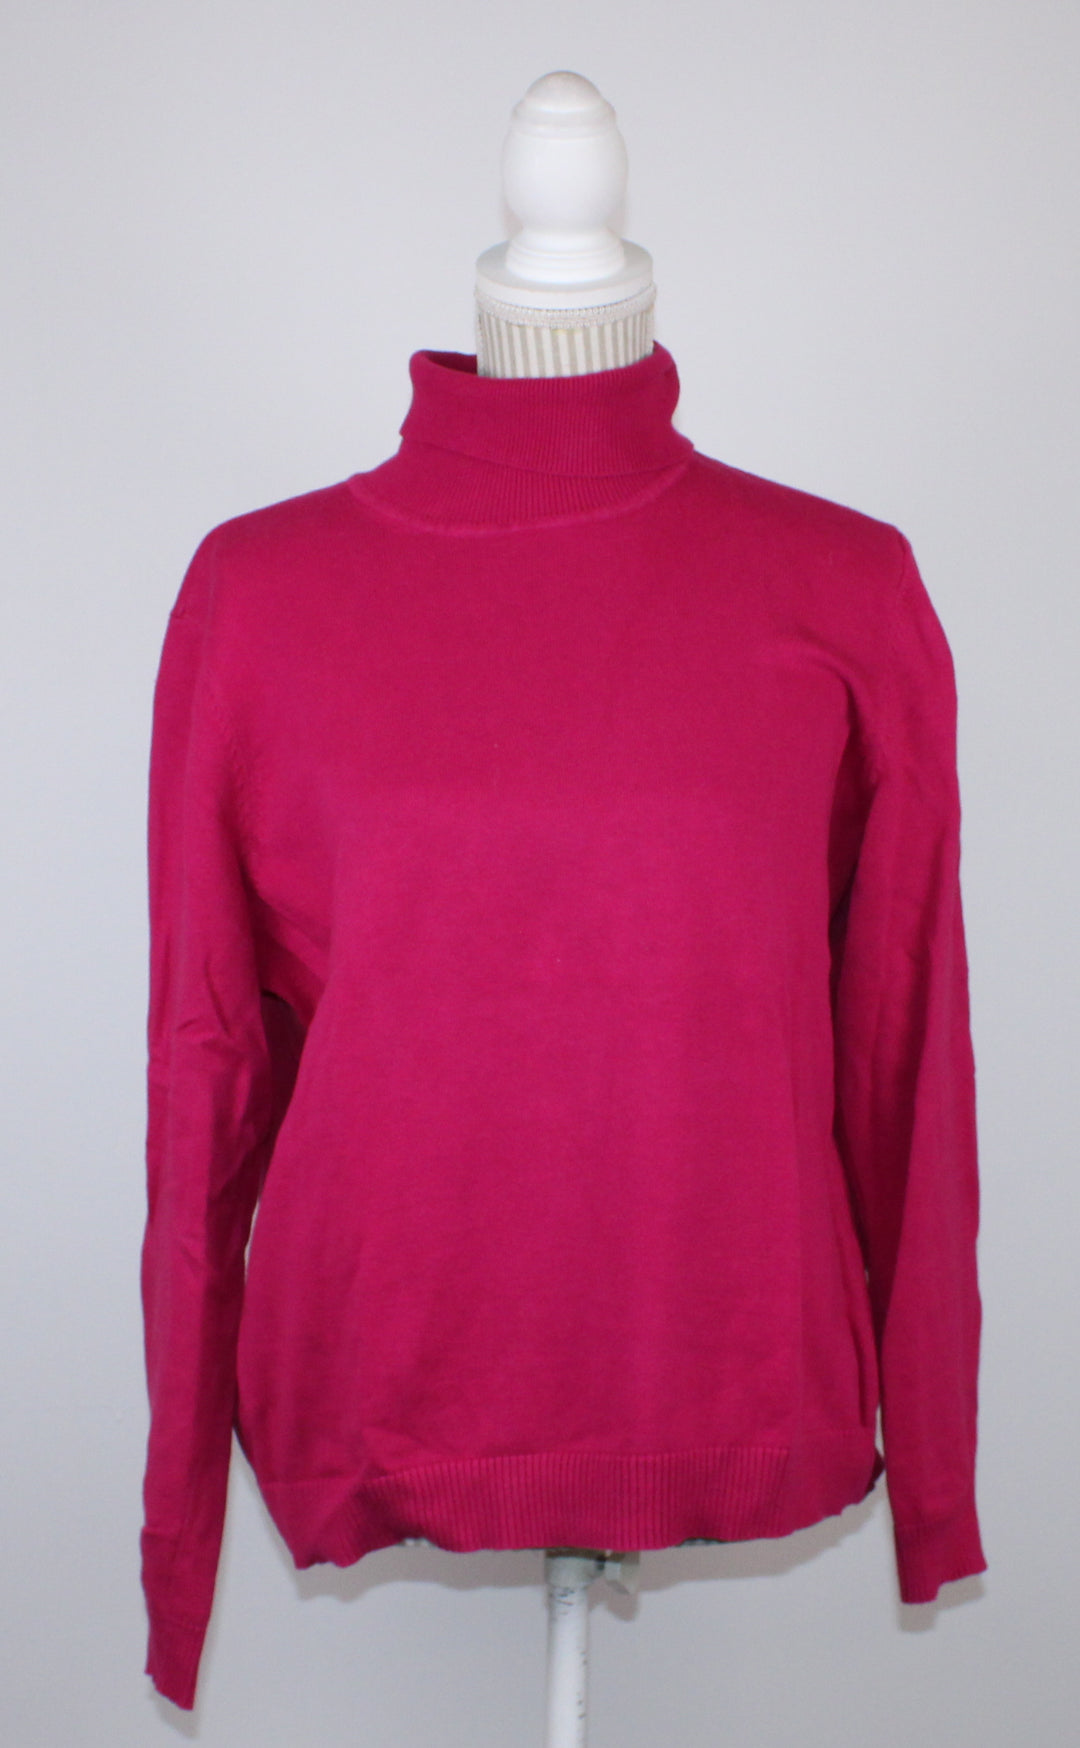 NORTHERN REFLECTIONS PINK TURTLE NECK LADIES LARGE EUC